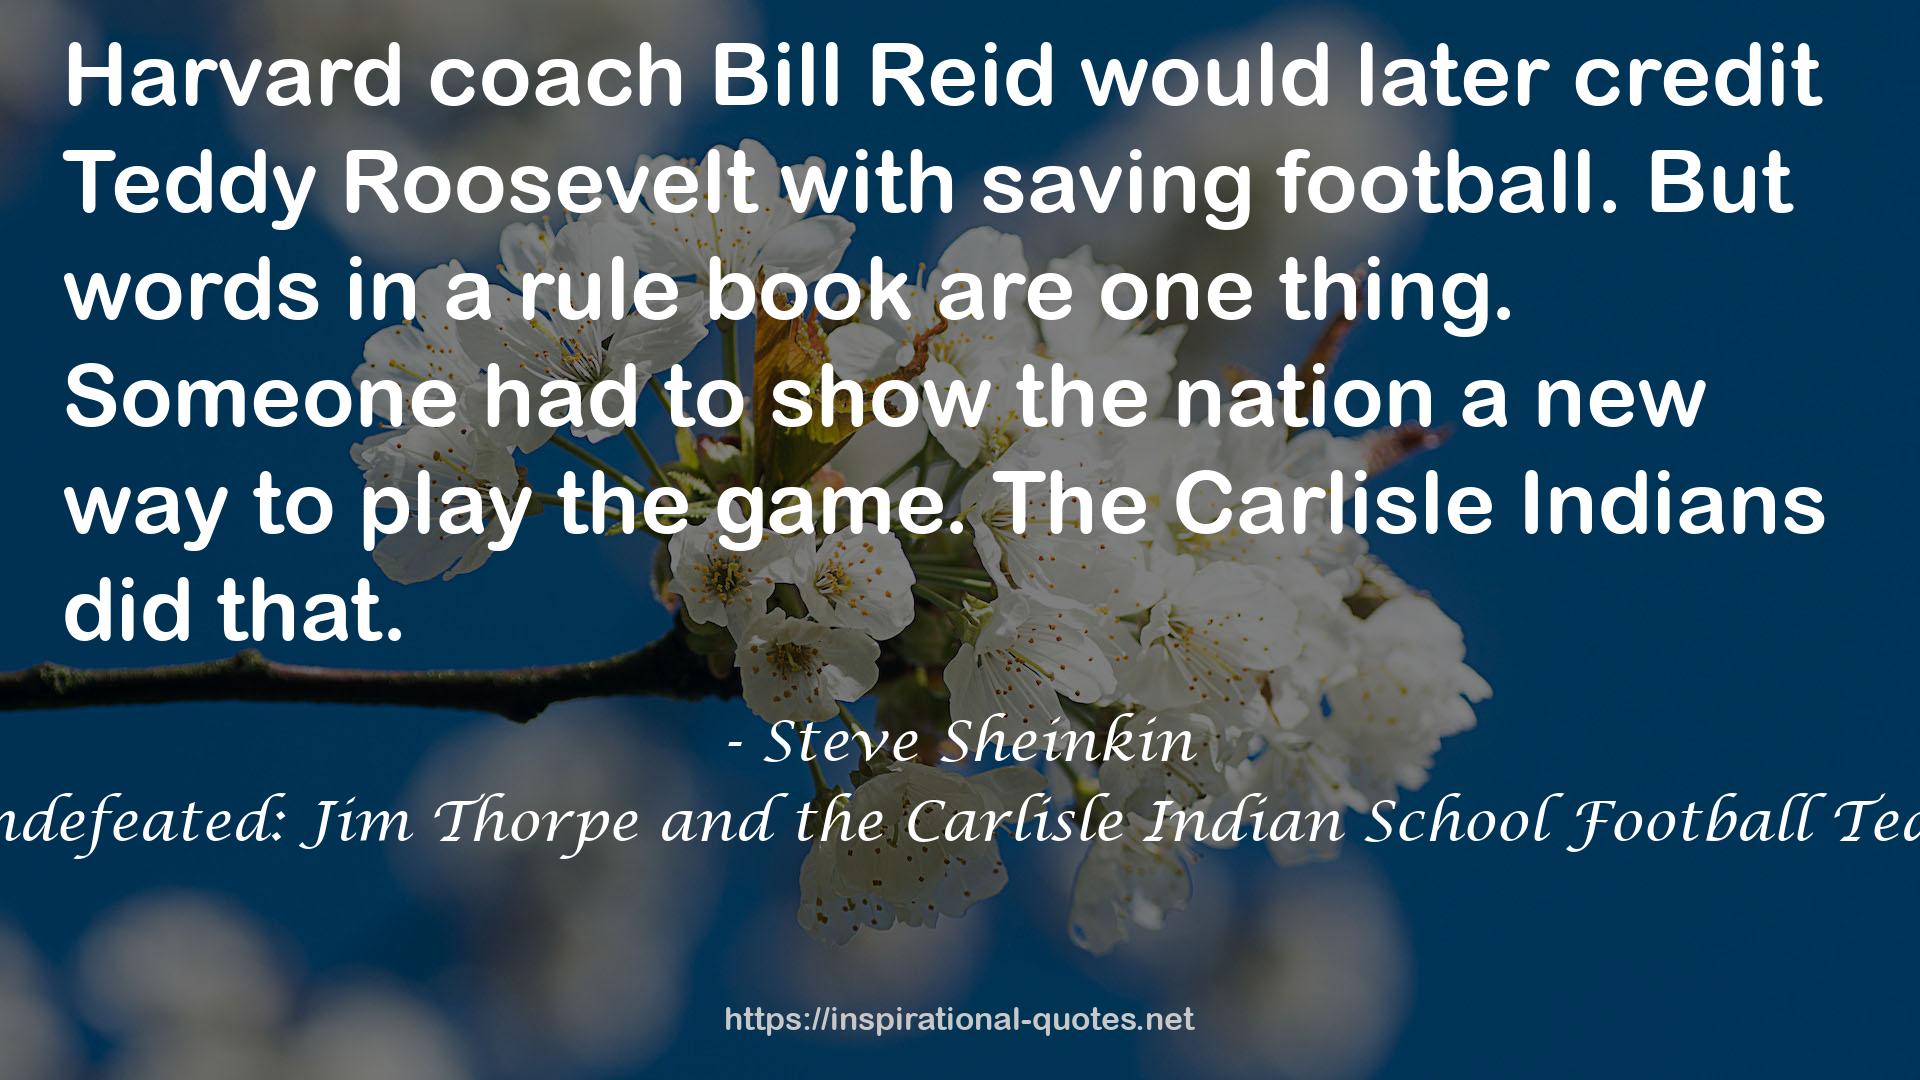 Undefeated: Jim Thorpe and the Carlisle Indian School Football Team QUOTES